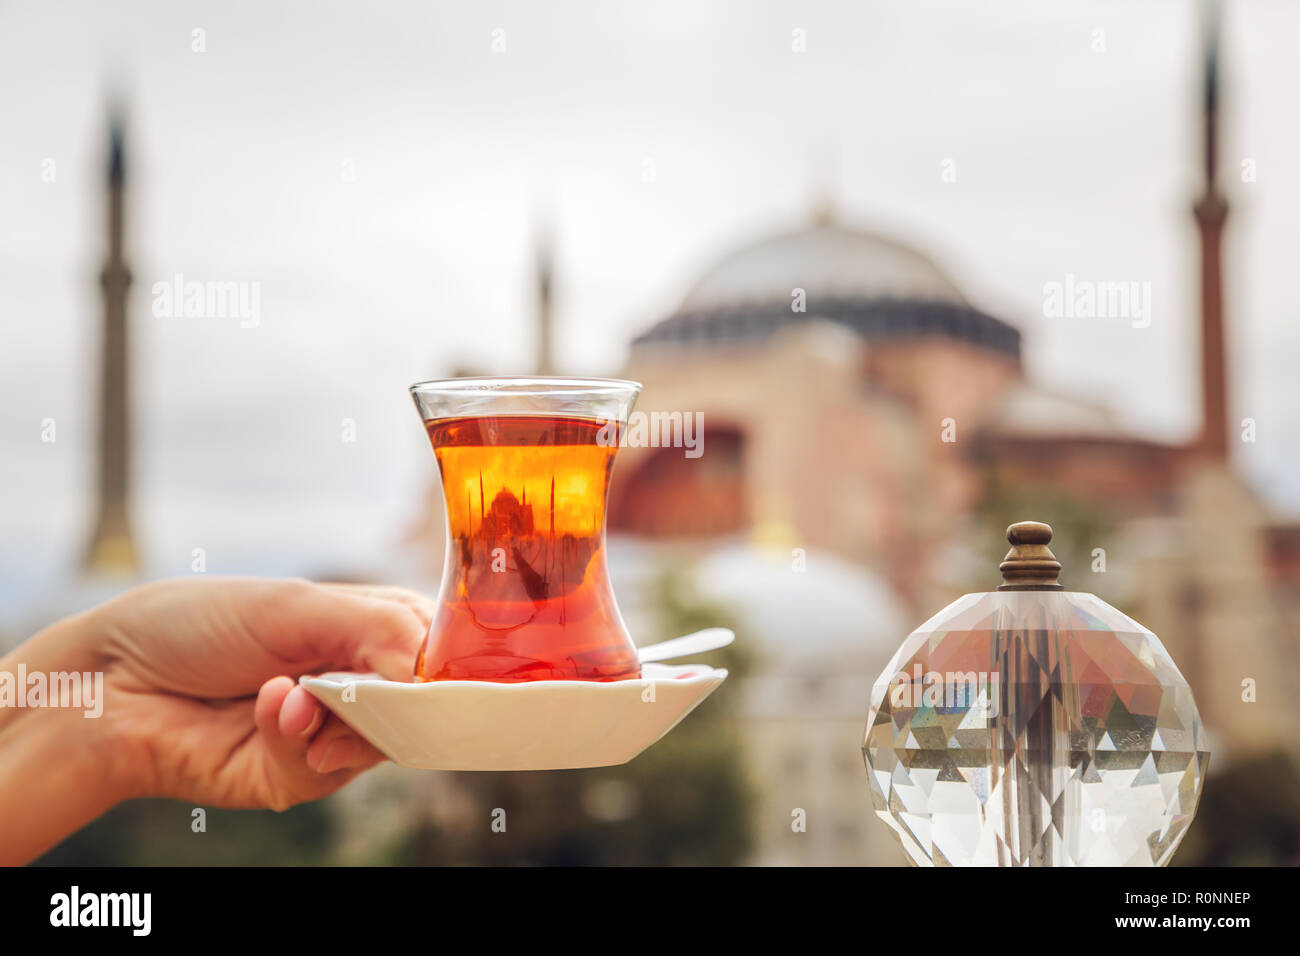 Cup of Turkish tea against the background of the Hagia Sophia Museum. Istanbul, Turkey. Stock Photo